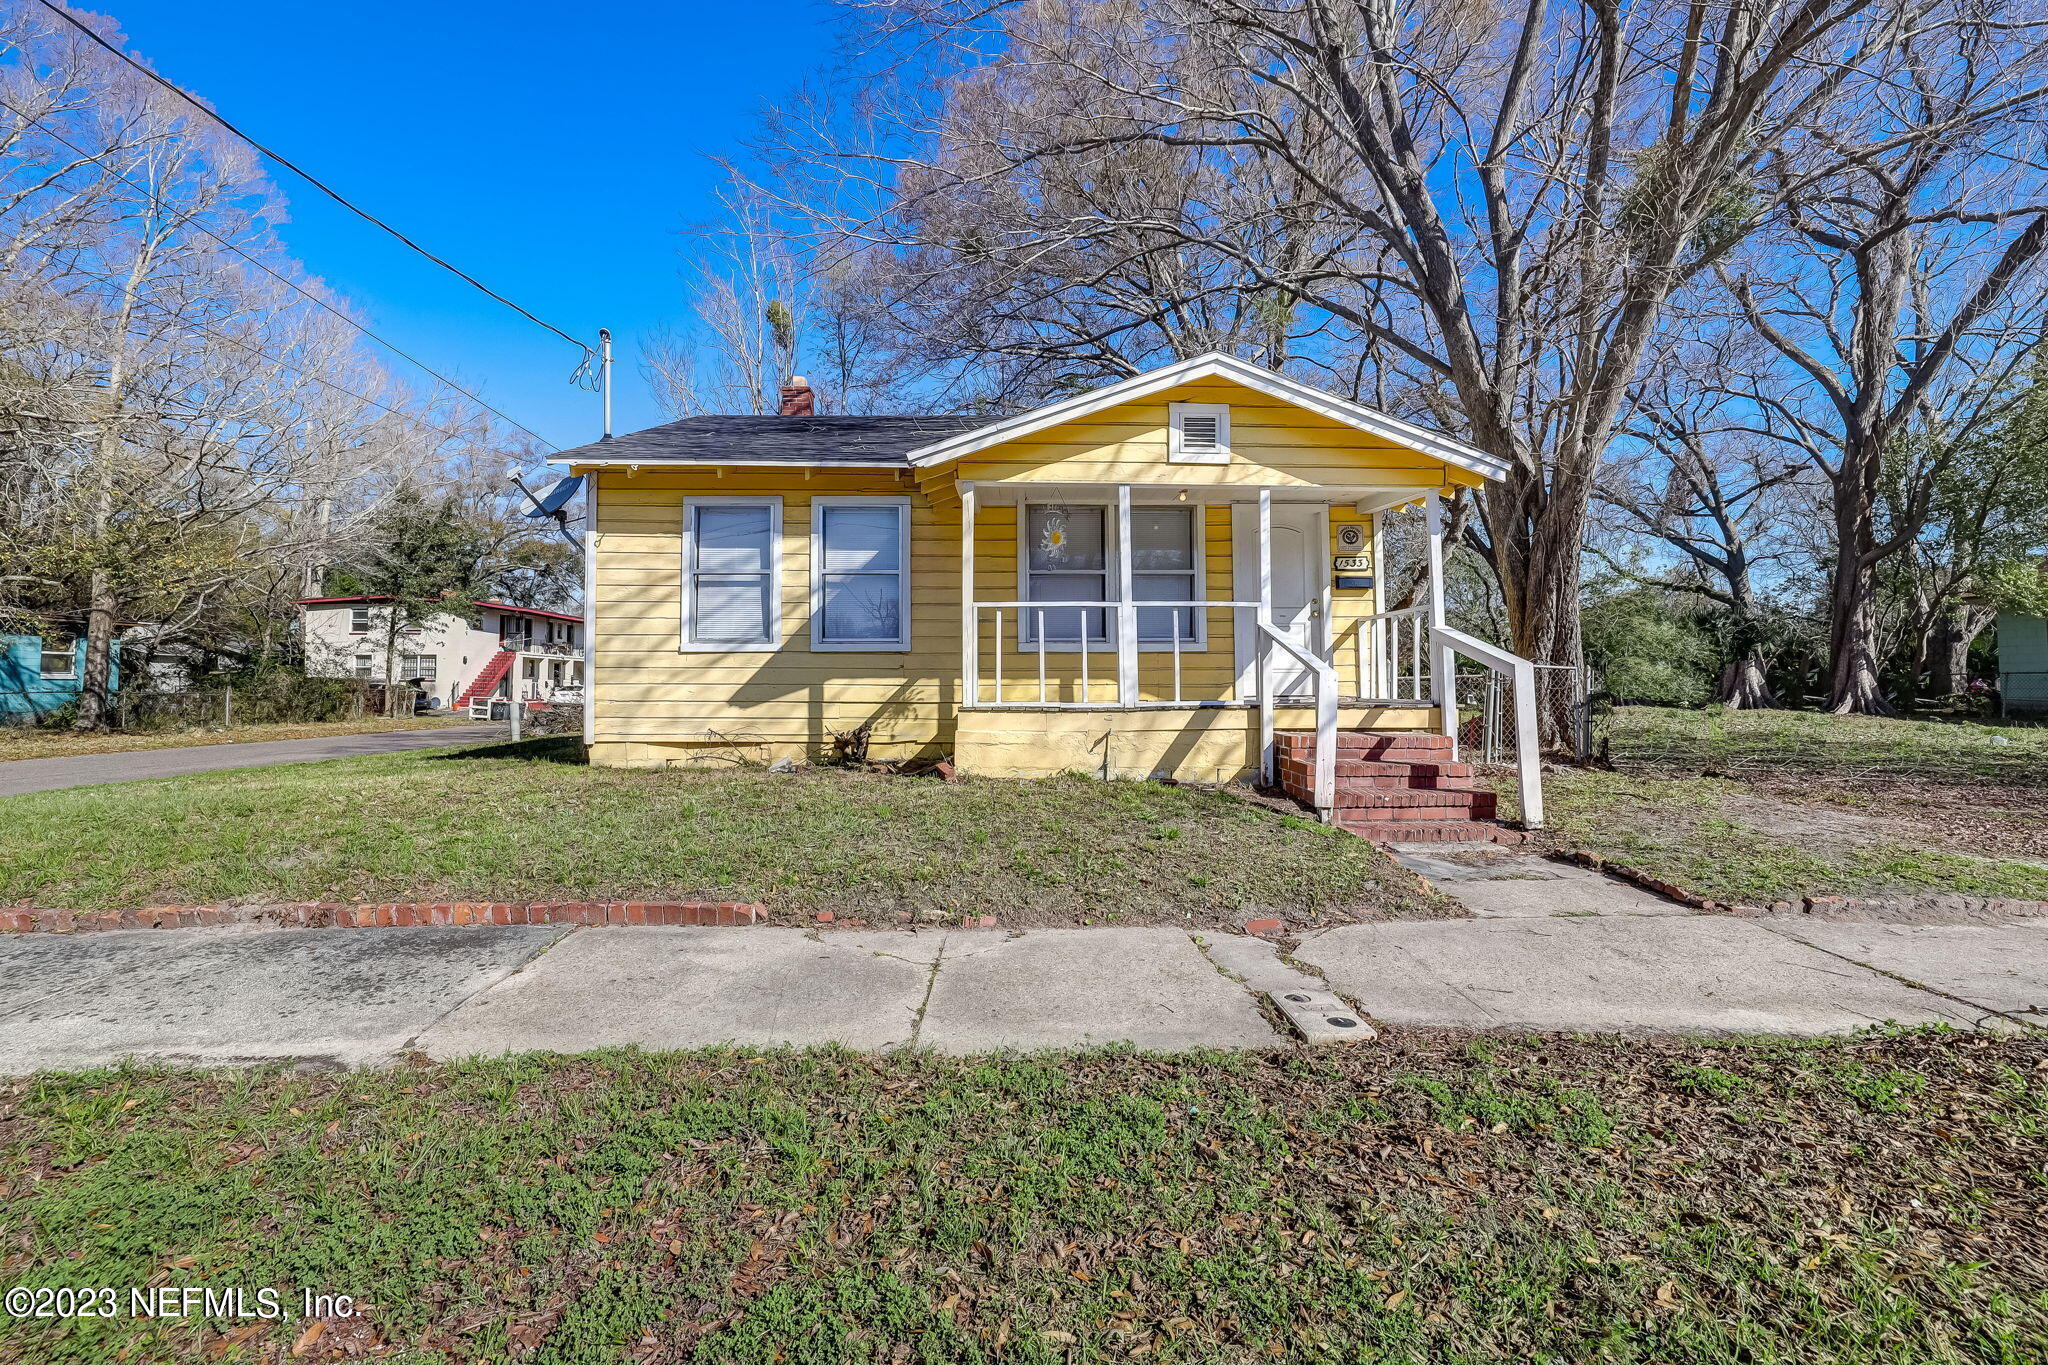 Jacksonville, FL home for sale located at 1533 W 16th Street, Jacksonville, FL 32209